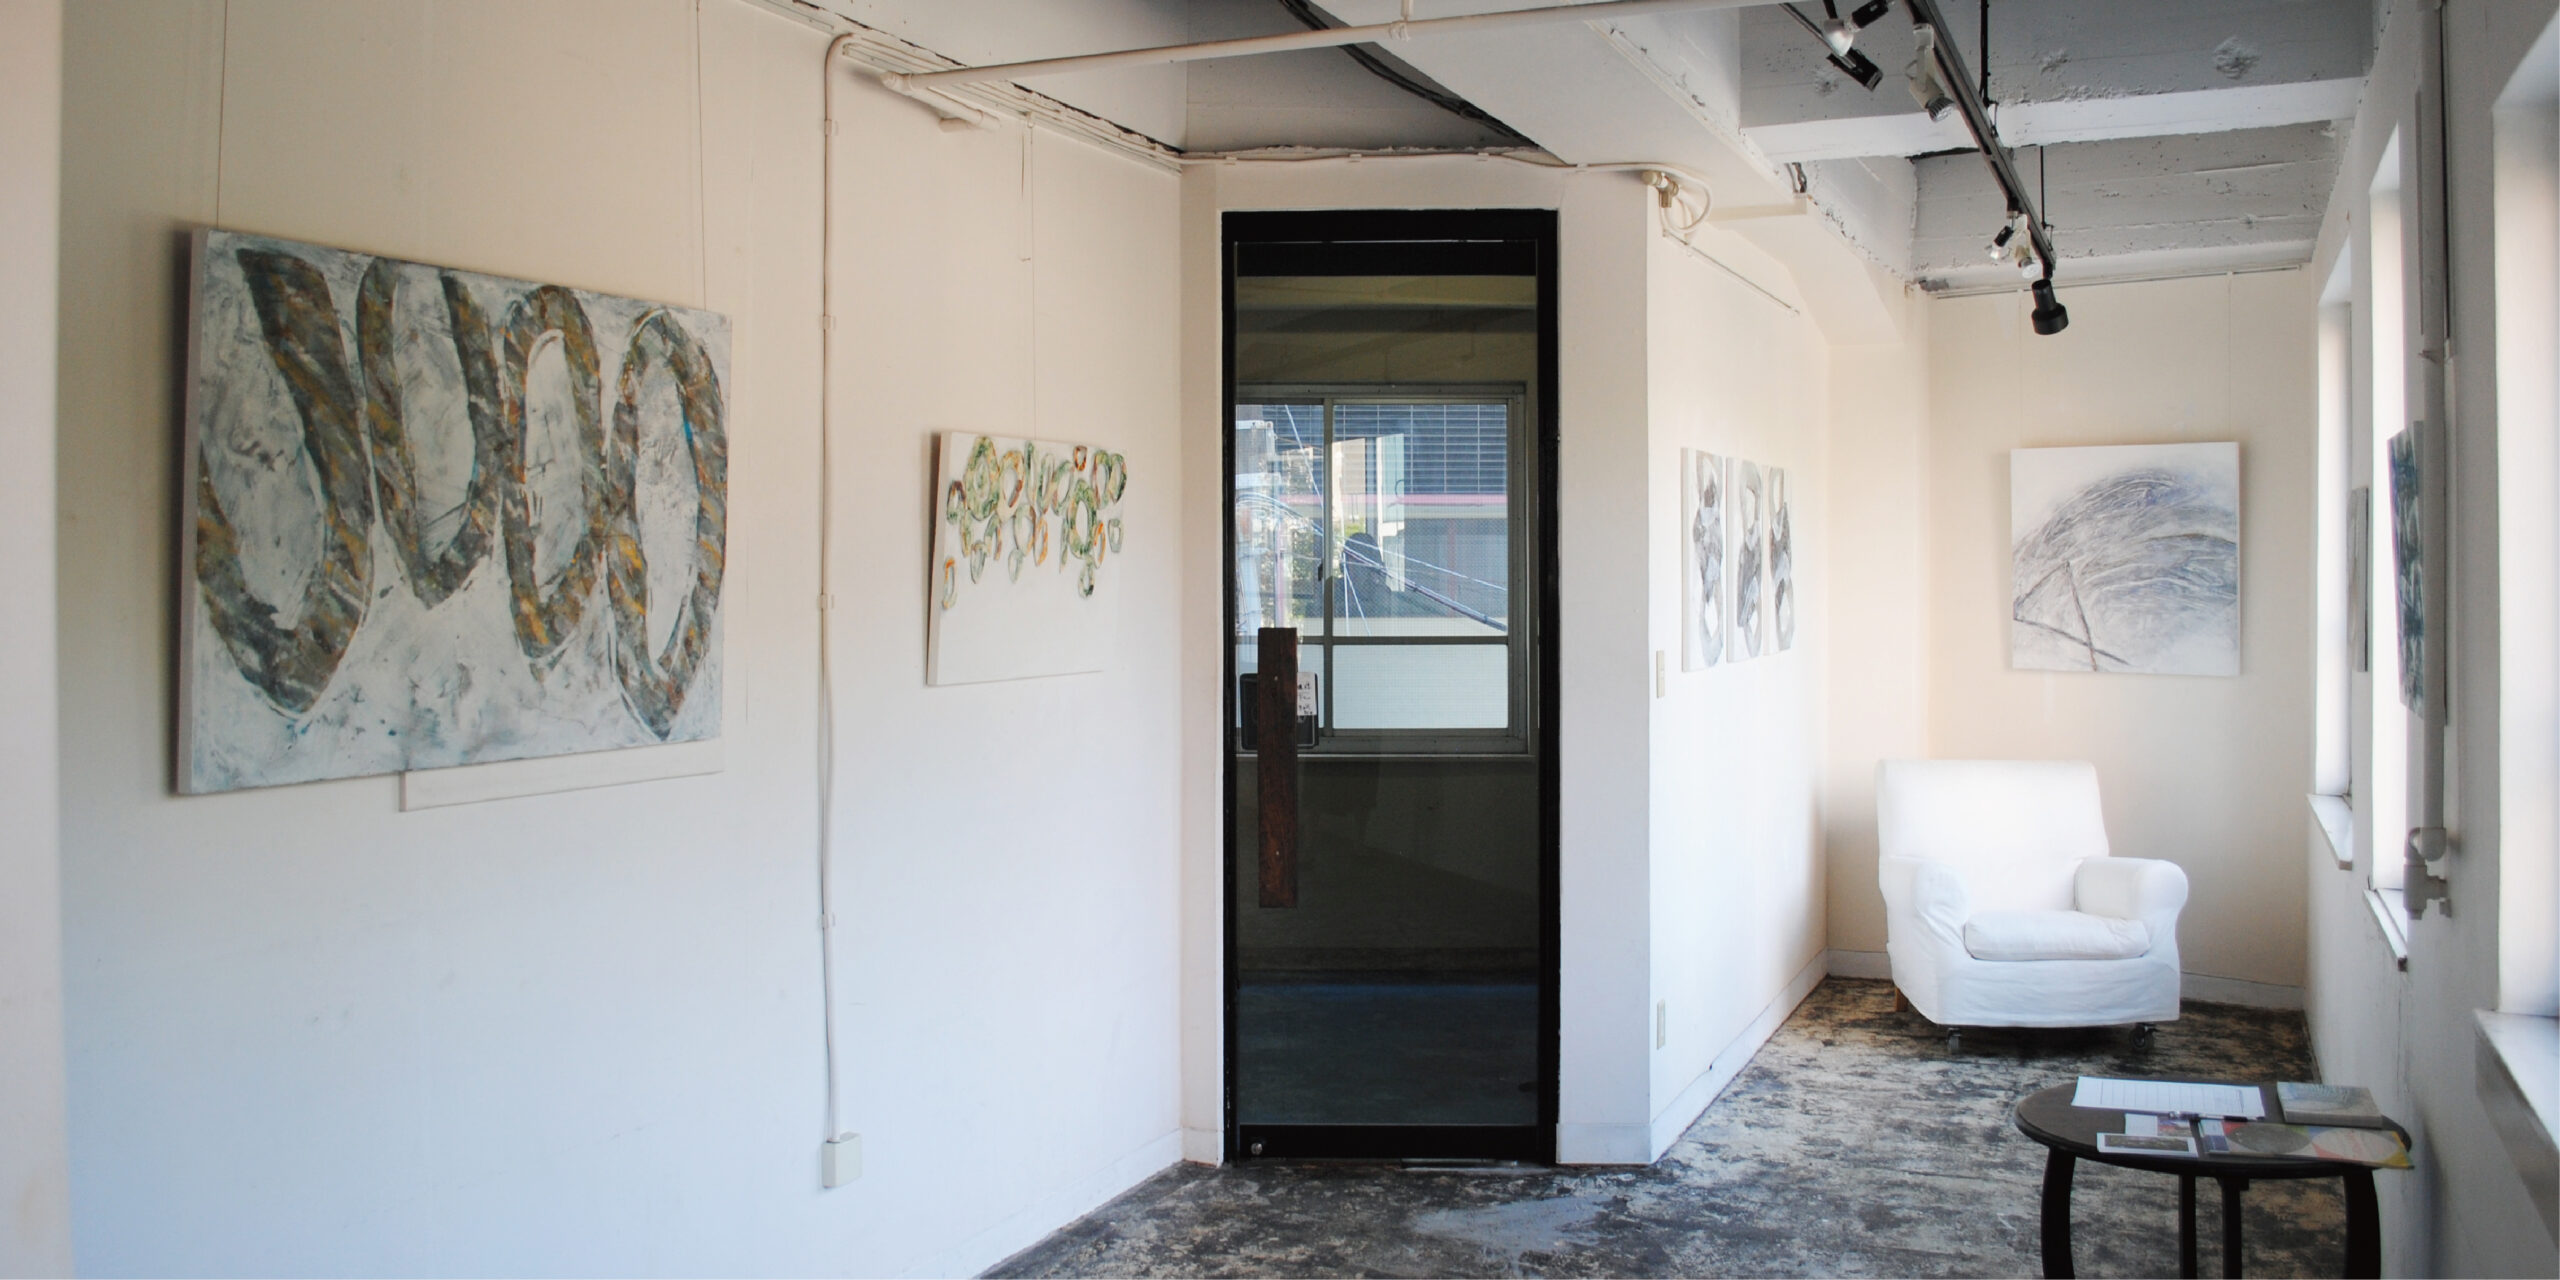 Kiyomi Irie Solo Exhibition “Planet X” has finished.